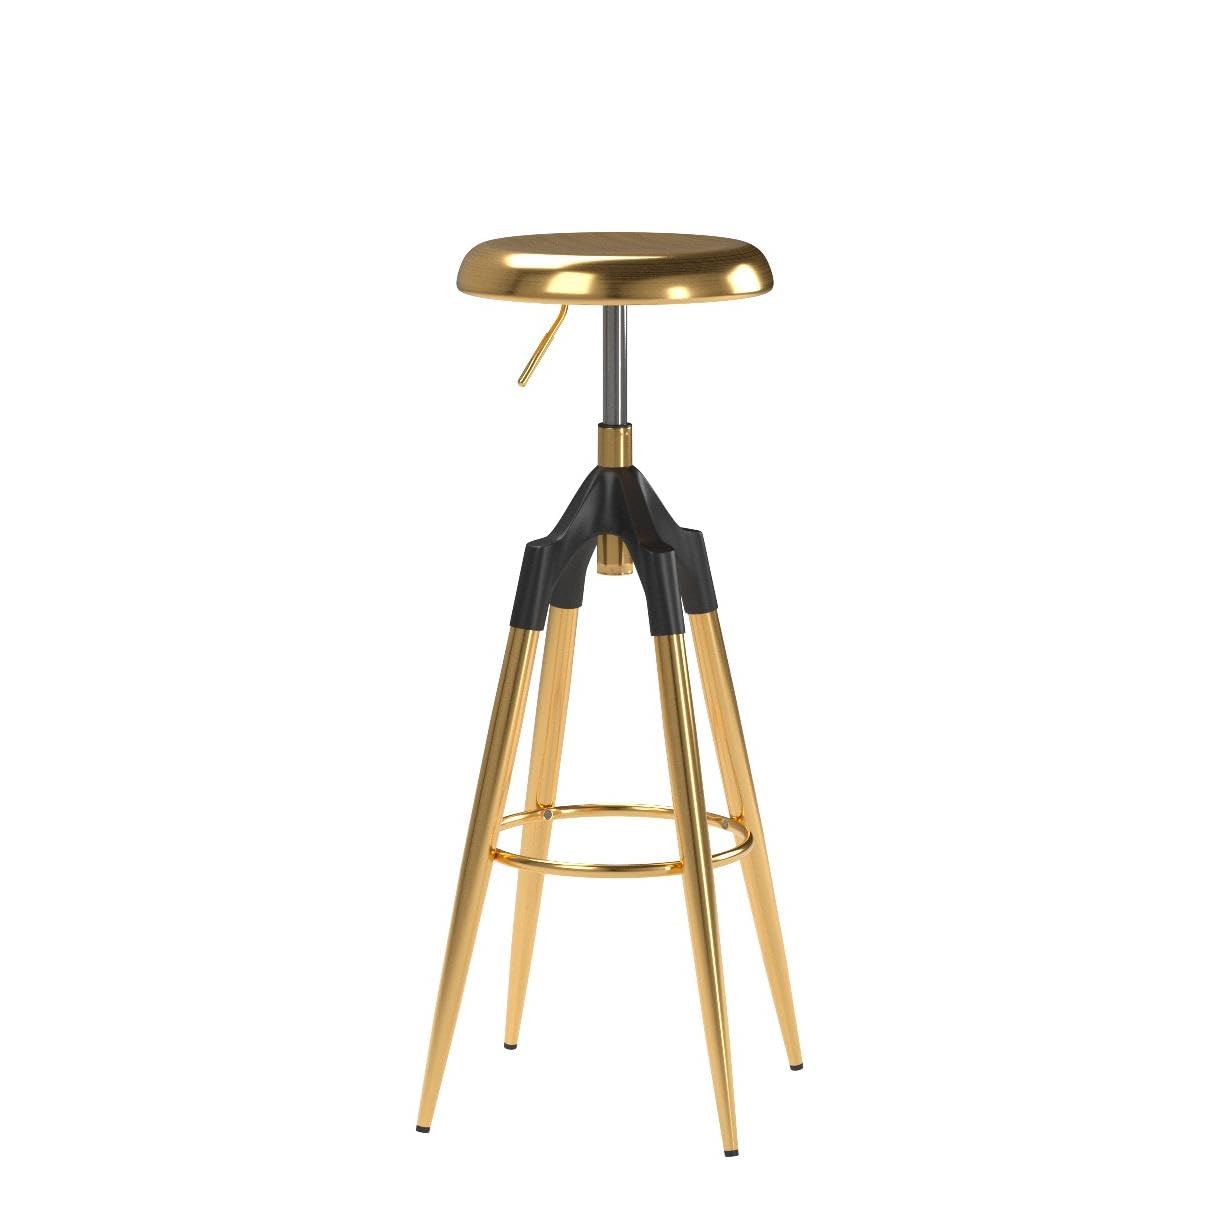 Brage Living 29-32.5 Inch Industrial Adjustable Bar Stool, Swivel Round Seat Metal Barstool with Legs, Backless Heavy Duty Airlift Bar Chair for Kitchen Dining Pub Cafe (Gold)